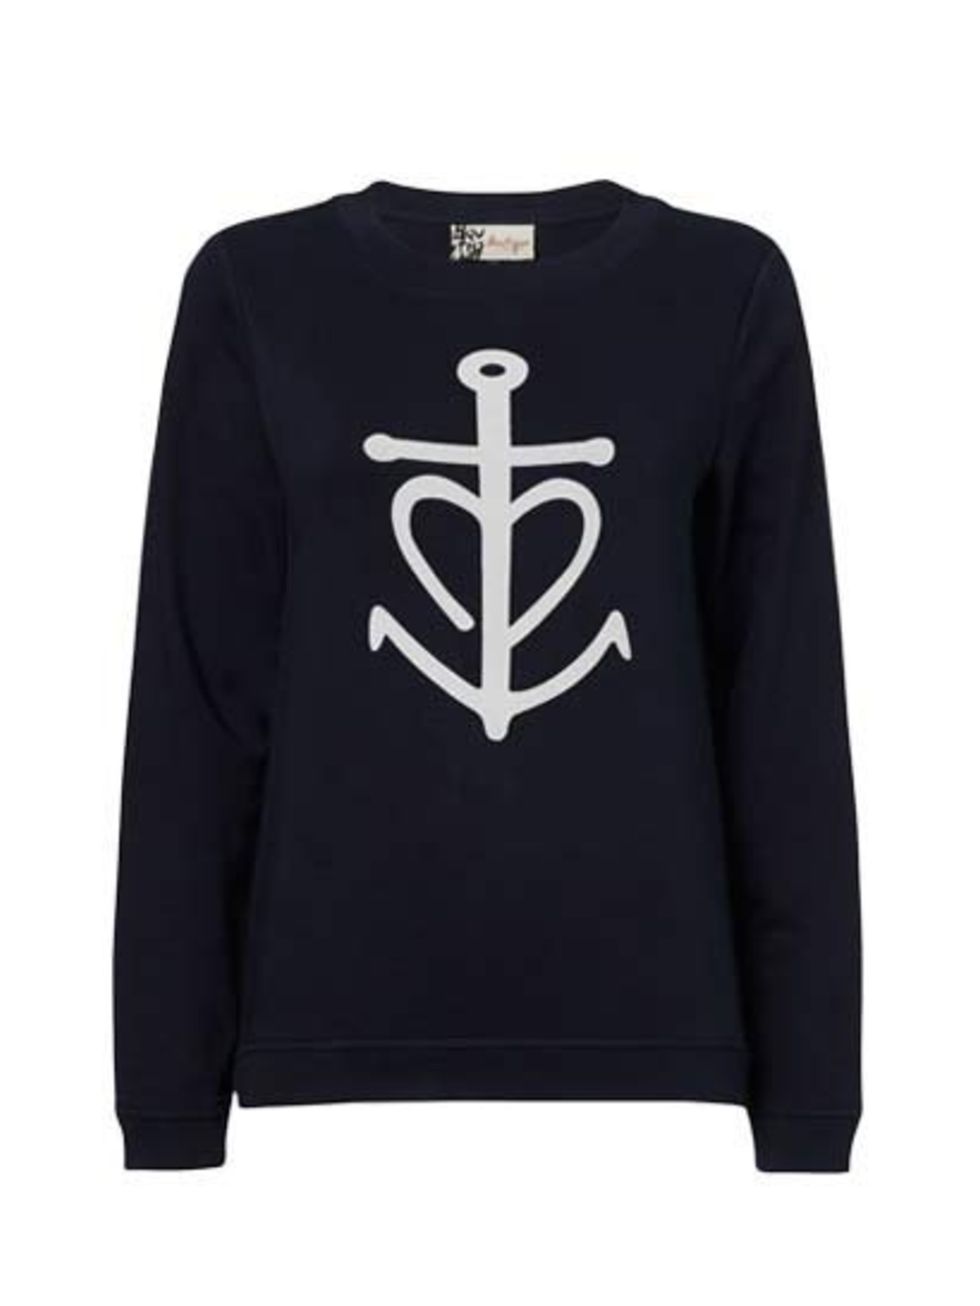 <p>Tap into the nautical trend with this simple sweatshirt; yacht not included, sadly.</p><p><a href="http://www.jaeger.co.uk/Anchor%20Sweatshirt/680073H,en_GB,pd.html?dwvar_680073H_color=75000&dwvar_680073H_size=XS&start=7&cgid=new_in_boutique">Jaeger Bo